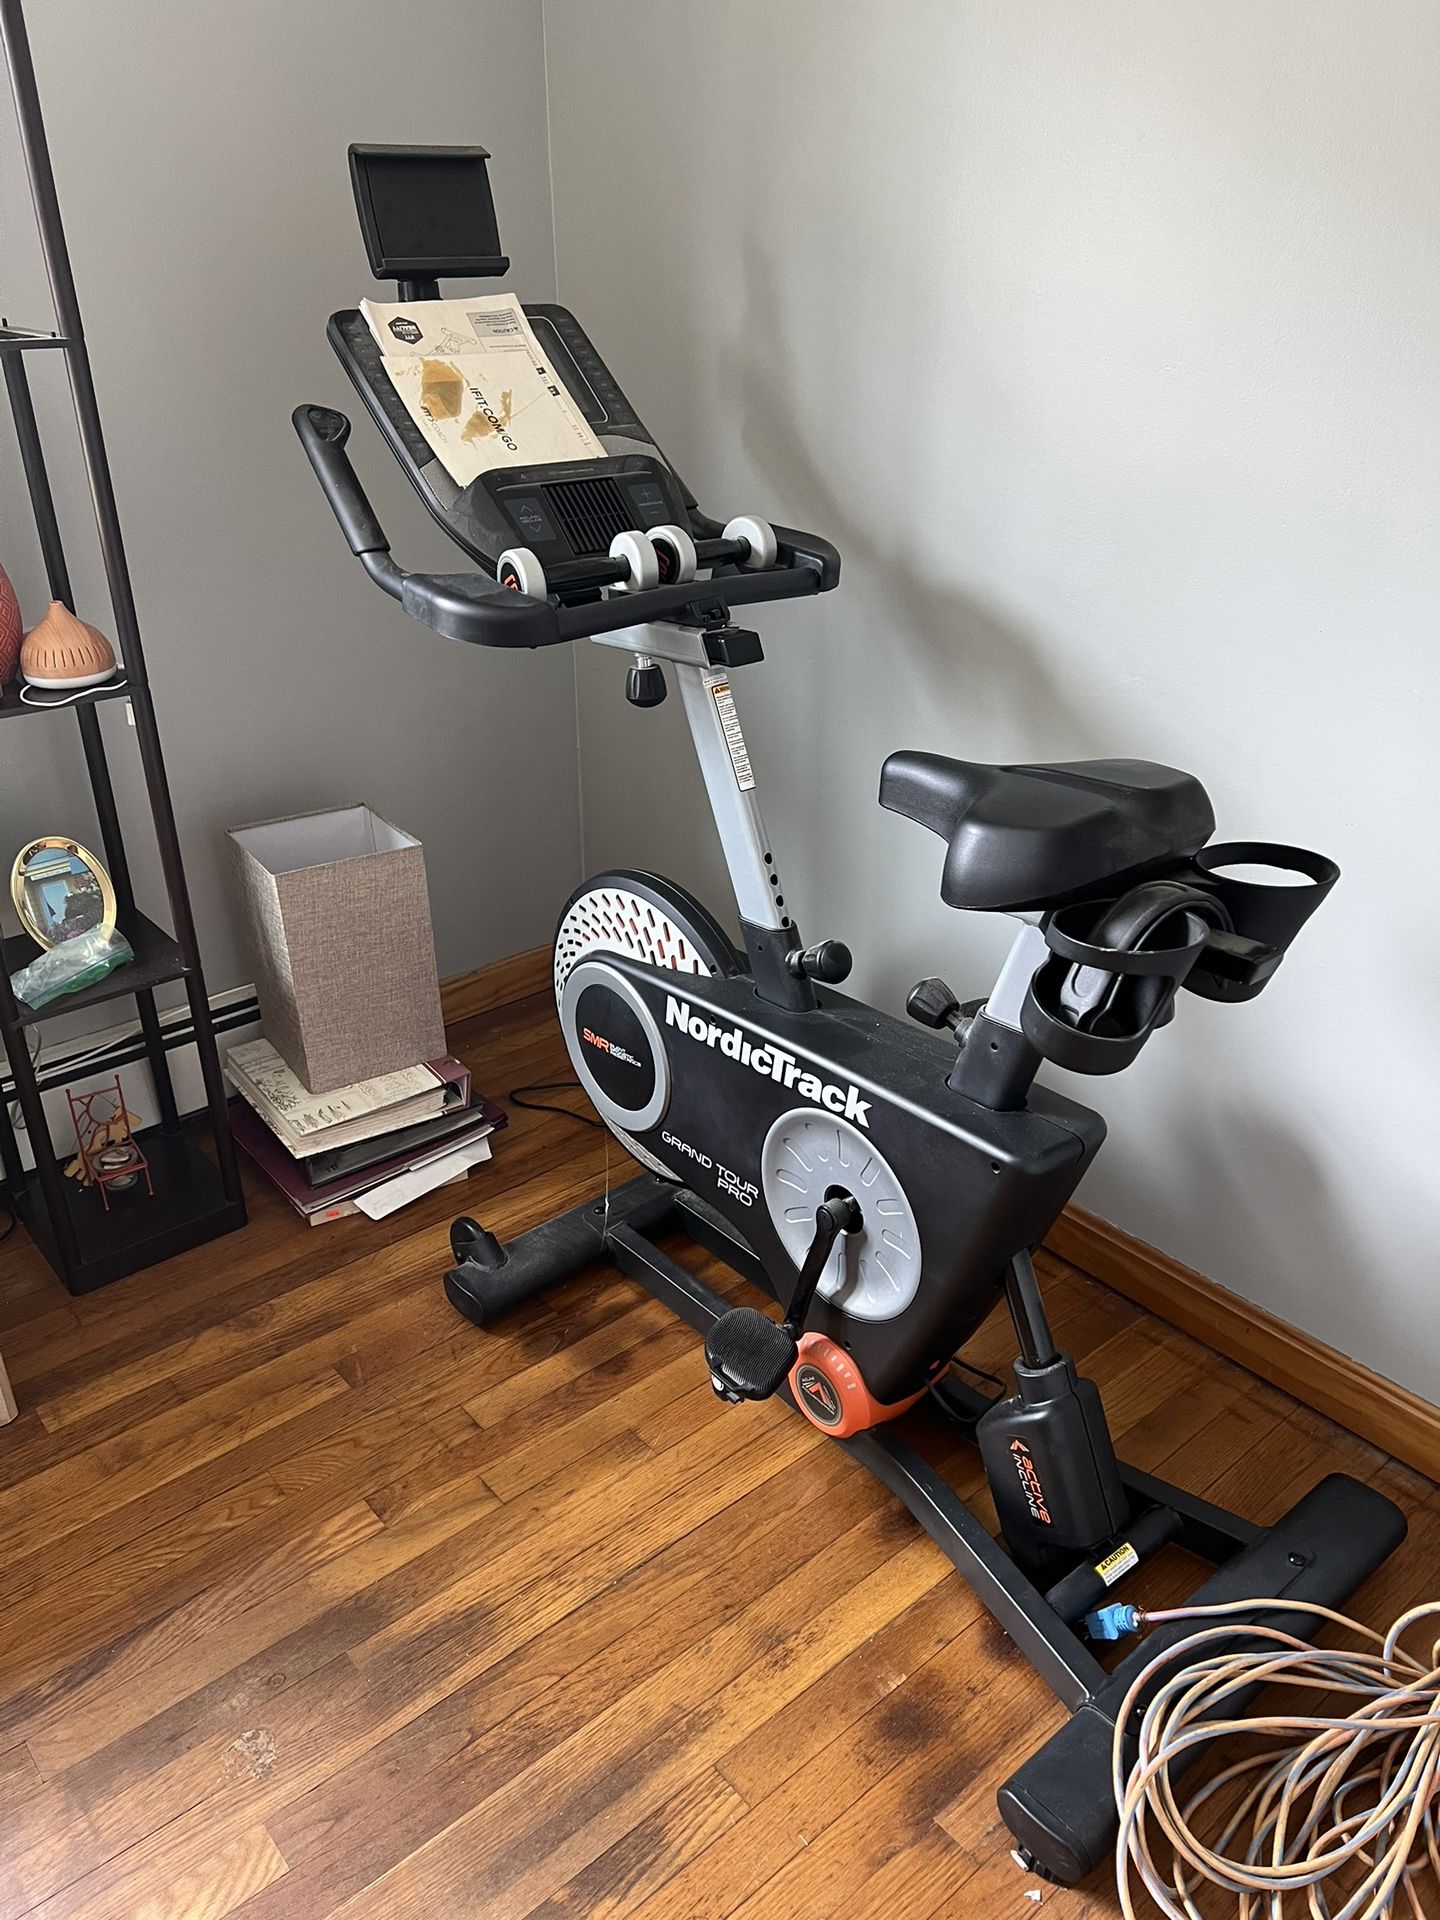 NordicTrack Stationary Exercise Bike